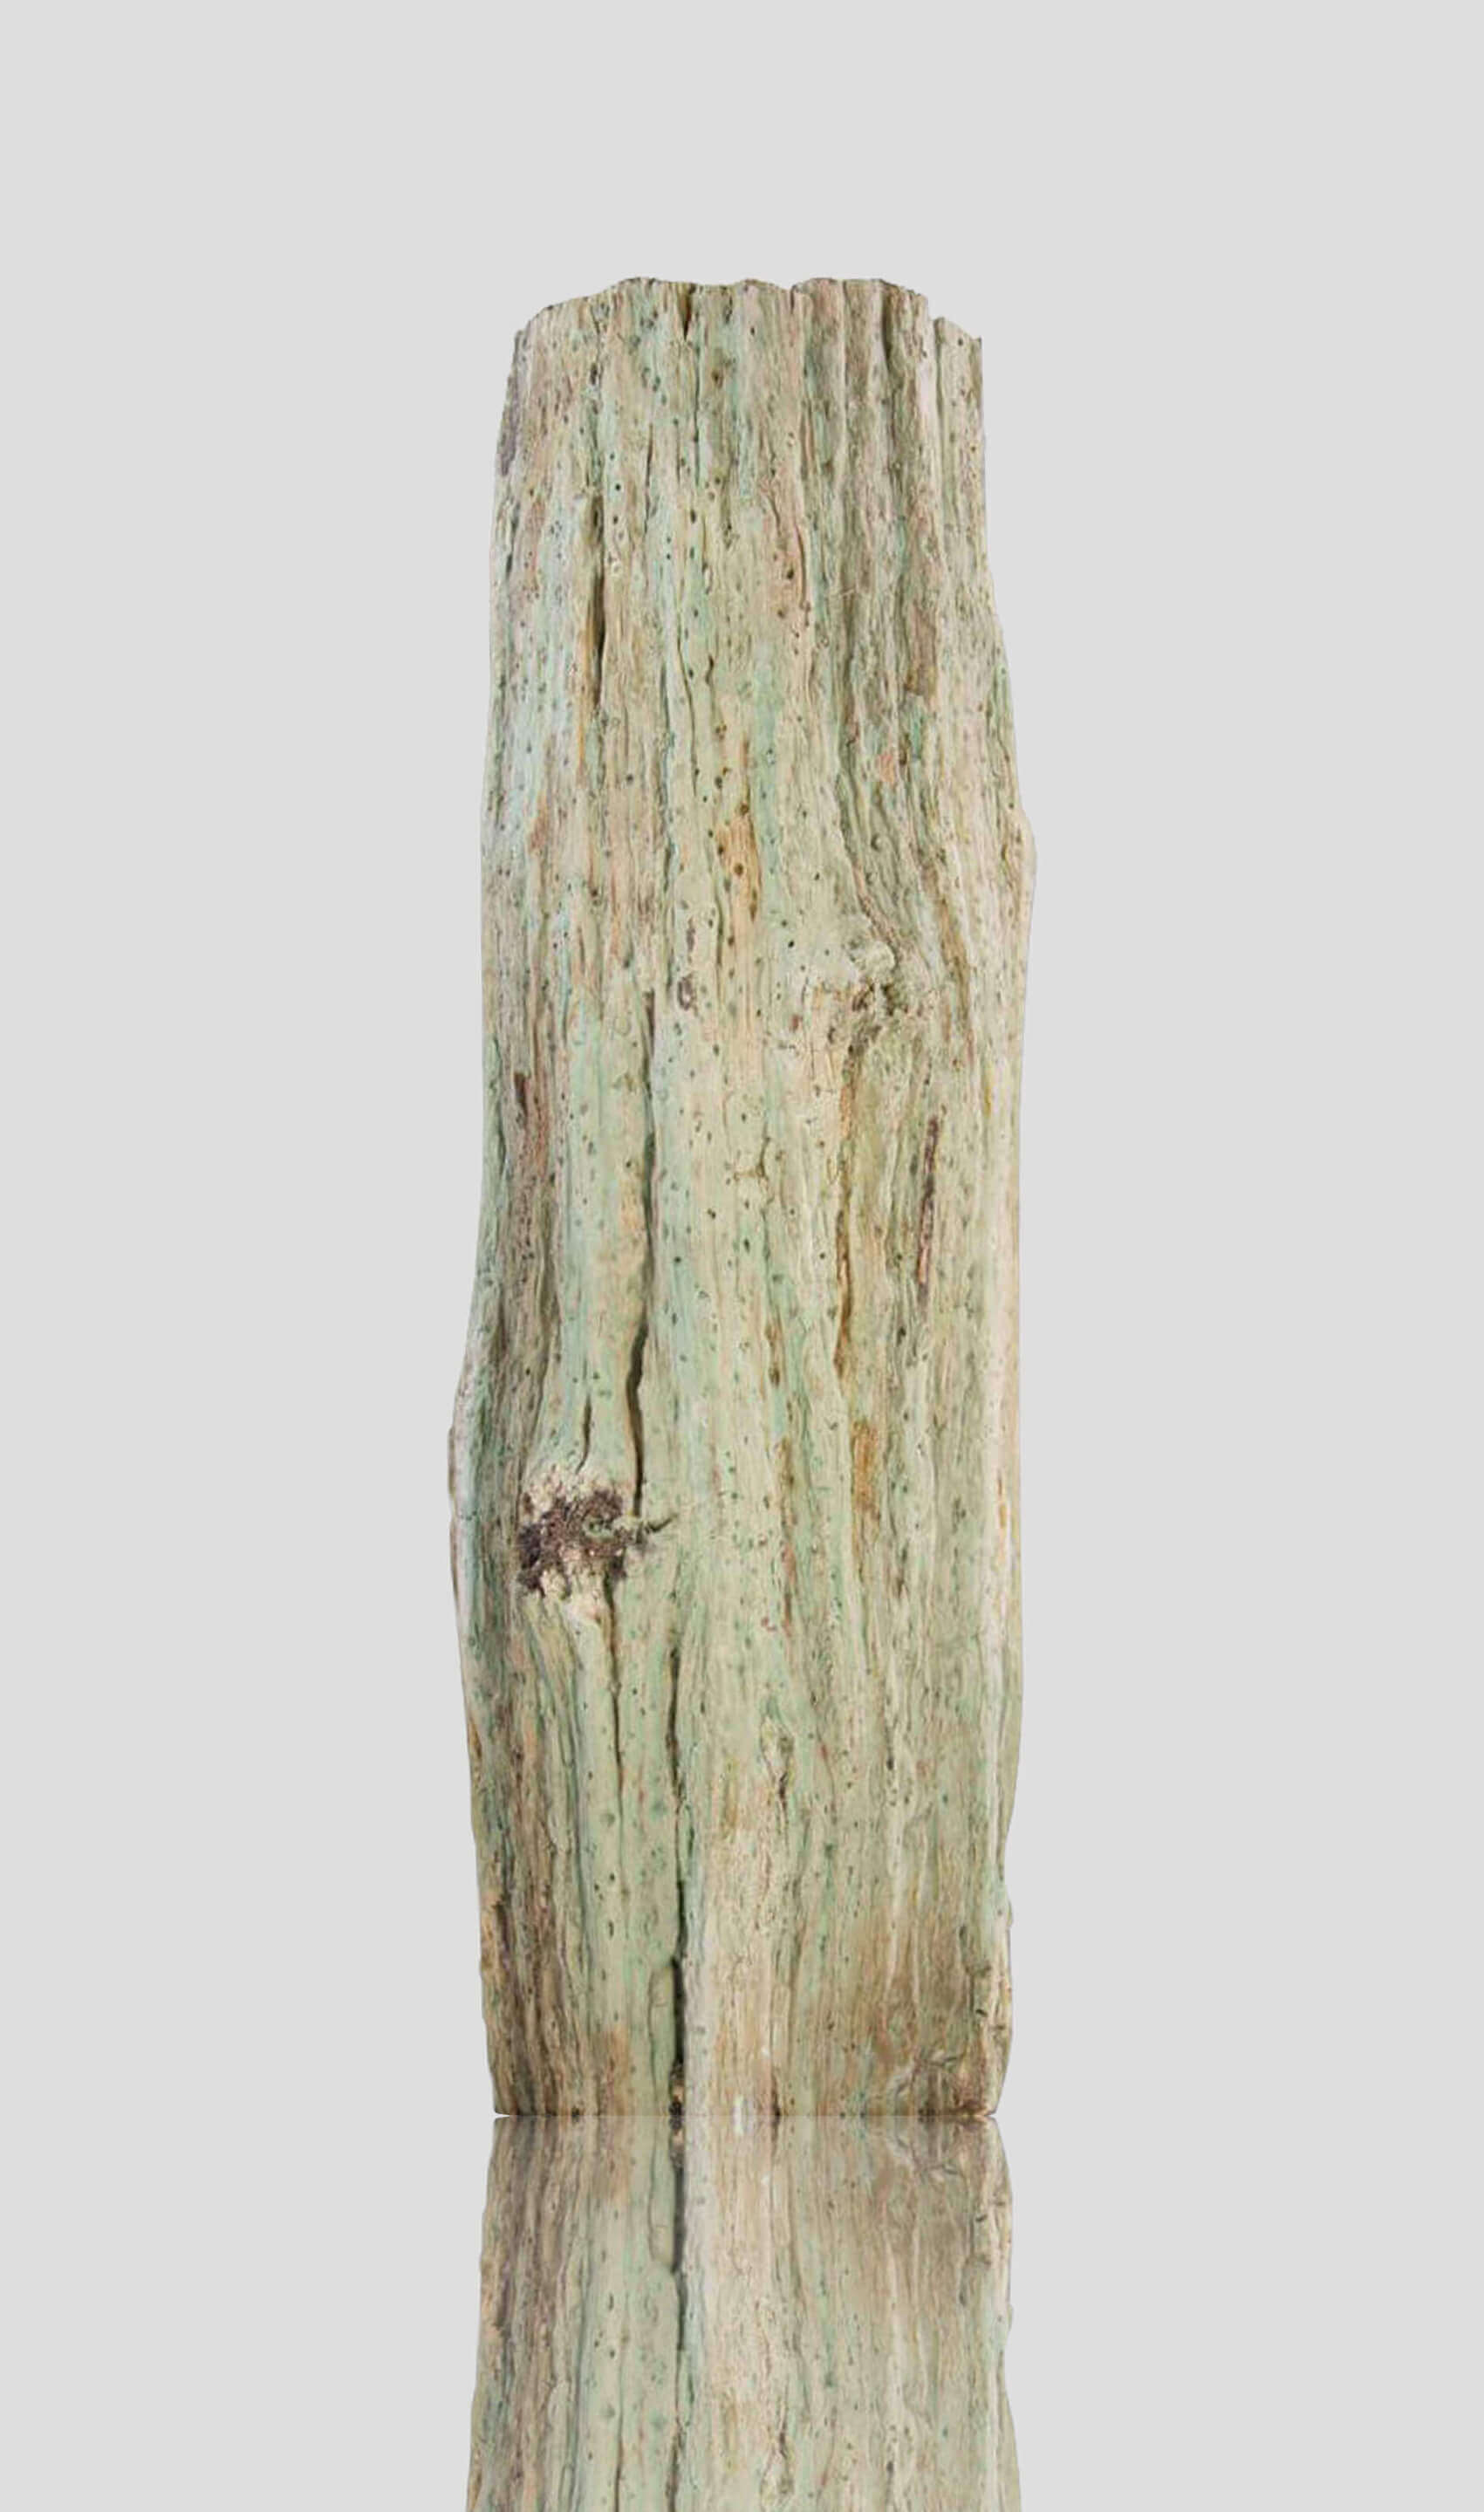 petrified tree trunk for sale of palm tree interior display 01